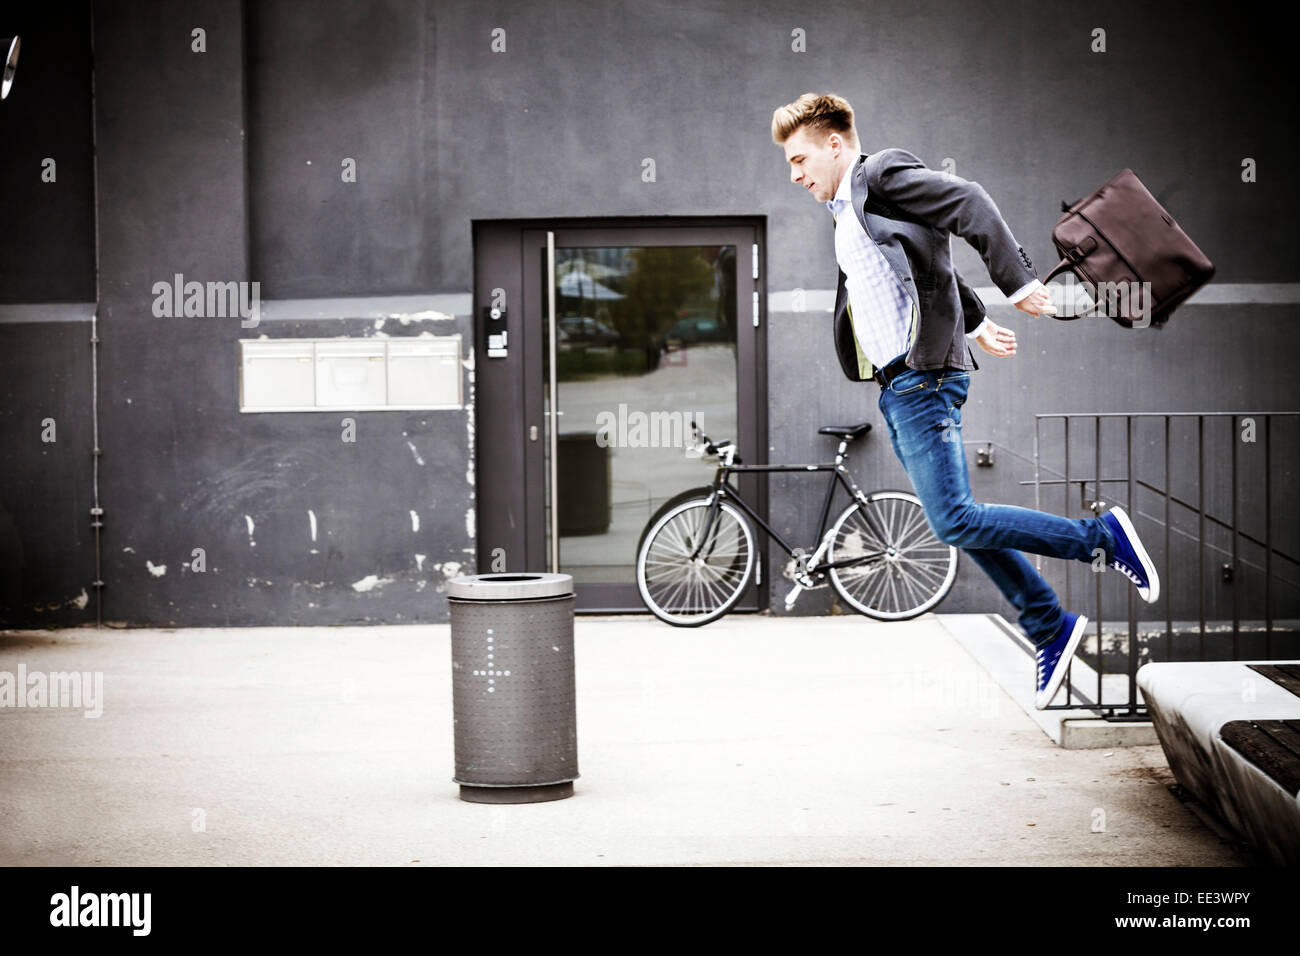 Young businessman jumping in air, Munich, Bavaria, Germany Stock Photo